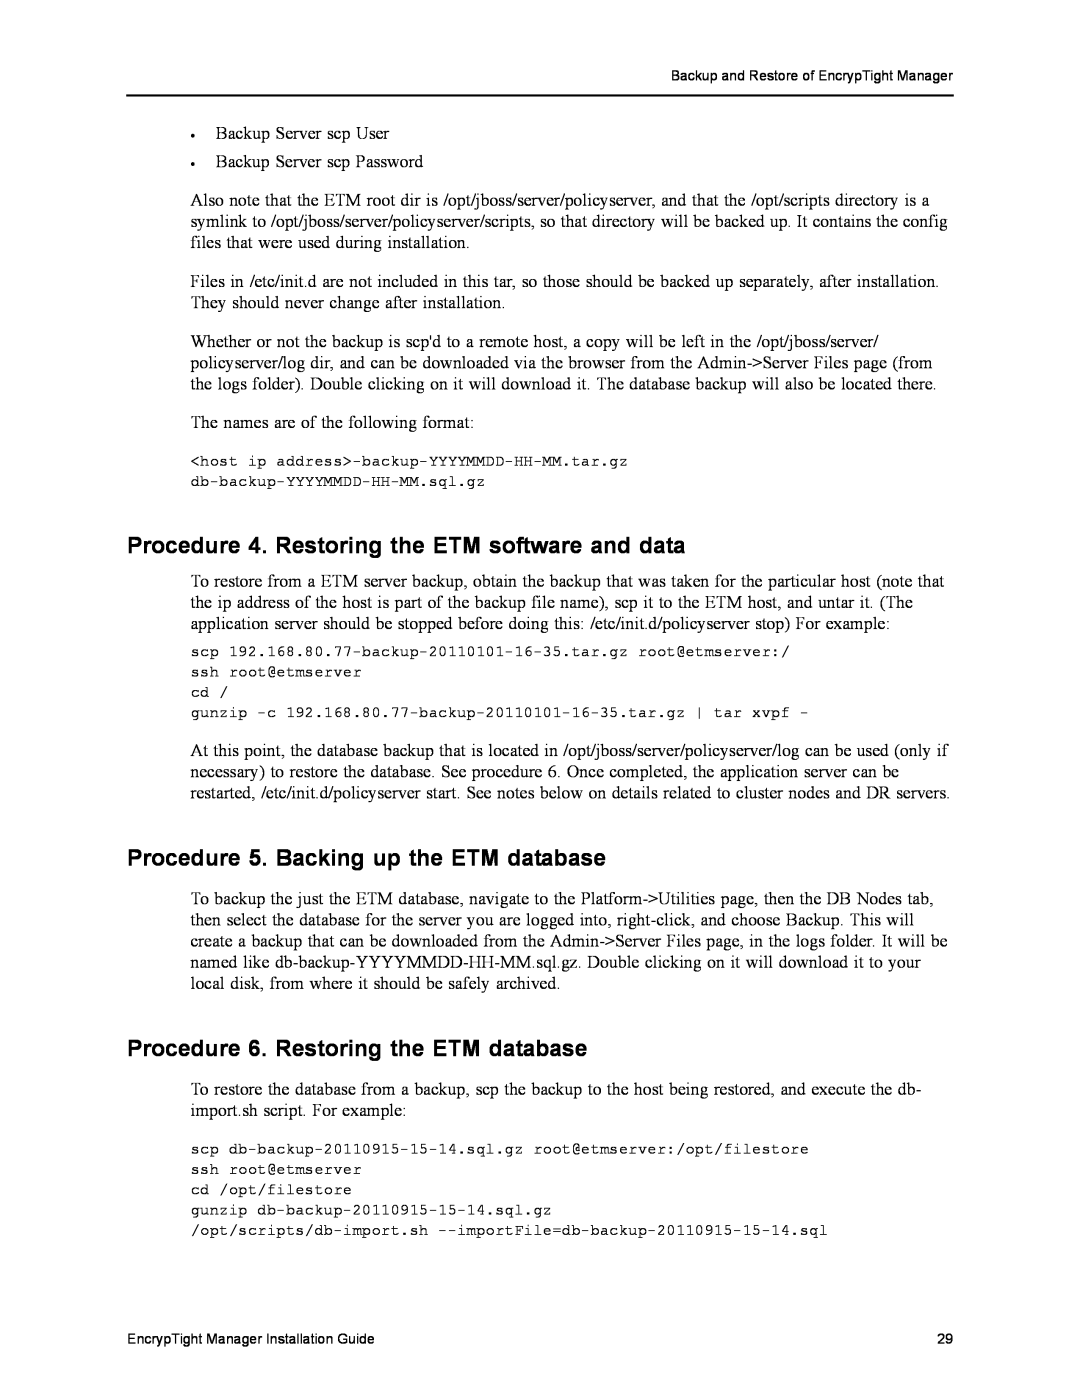 Black Box The EncrypTight manual Procedure 4. Restoring the ETM software and data, Procedure 5. Backing up the ETM database 